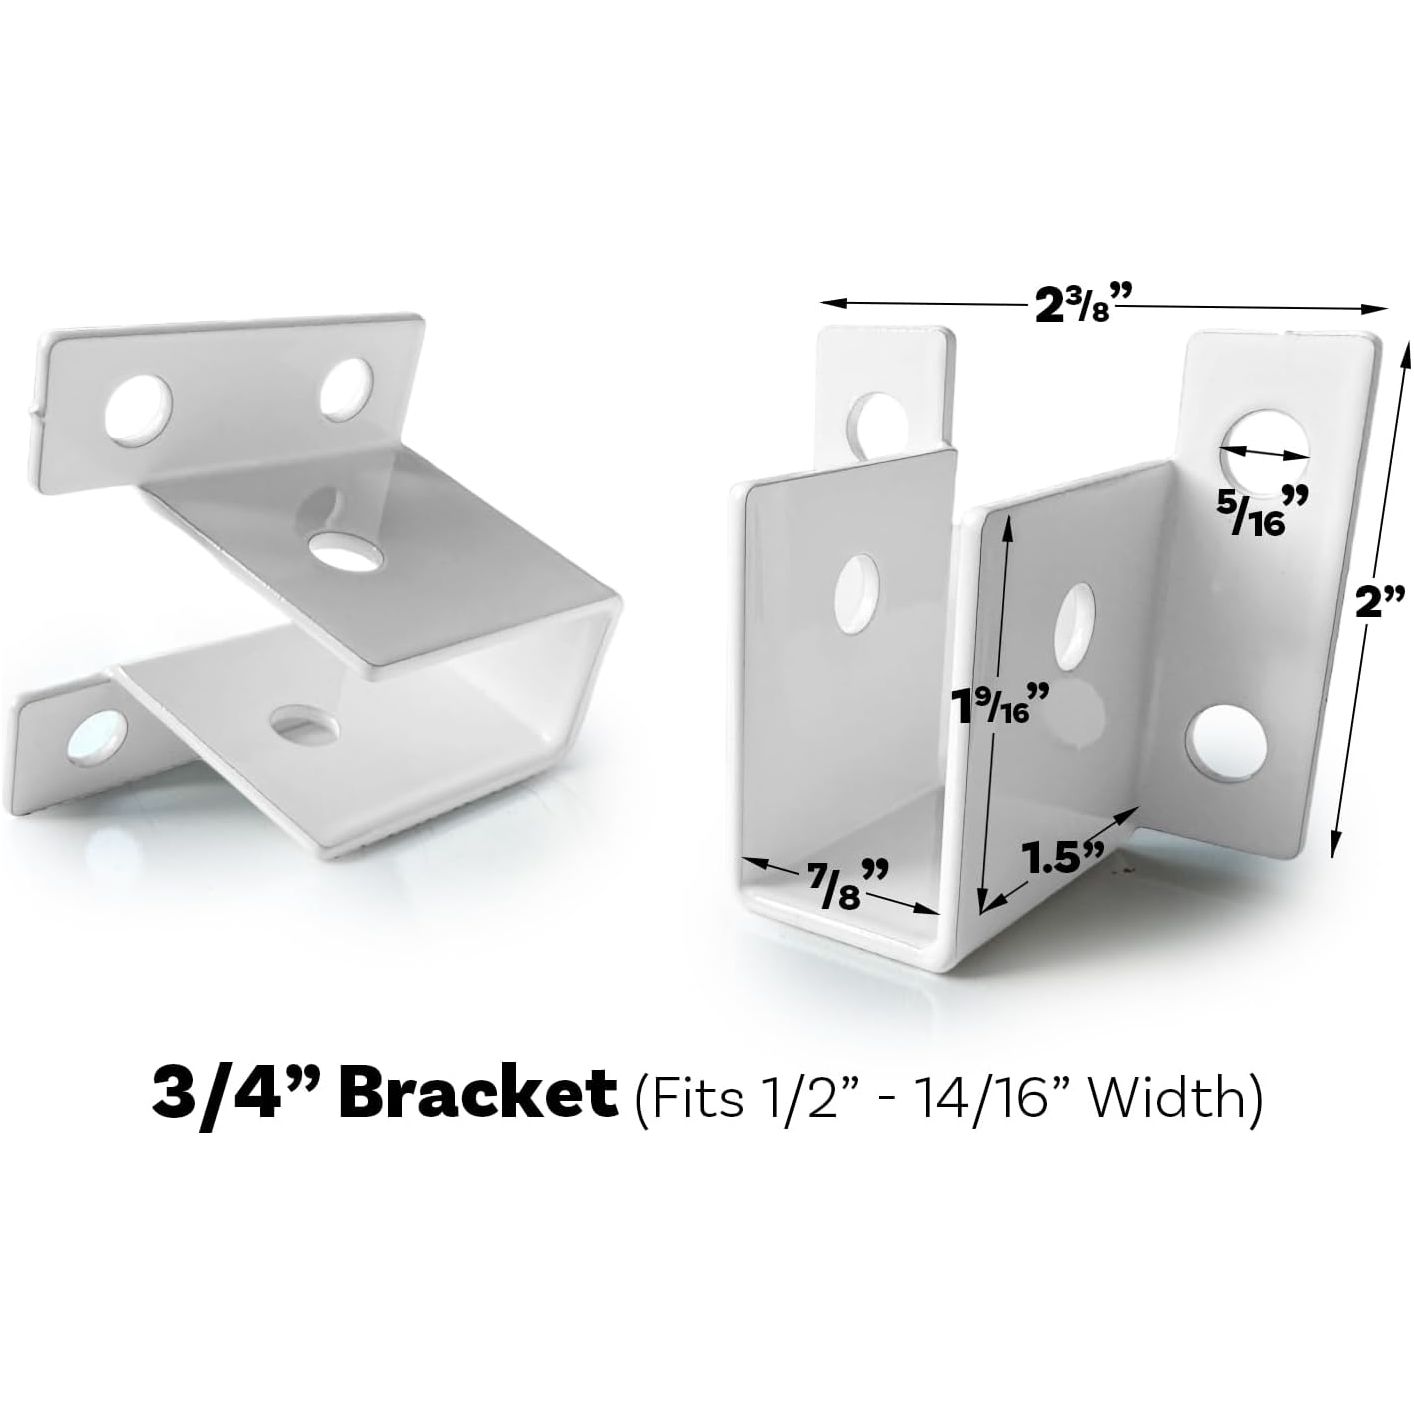 2-Pack, 3/4" Versatile U-Bracket Set, Mount Larger Substrates & Panels, White Powder Coated Steel, Ideal for Wider Applications, Mounting Screws not Included (1/2" - 14/16" Width, 2-Pack)